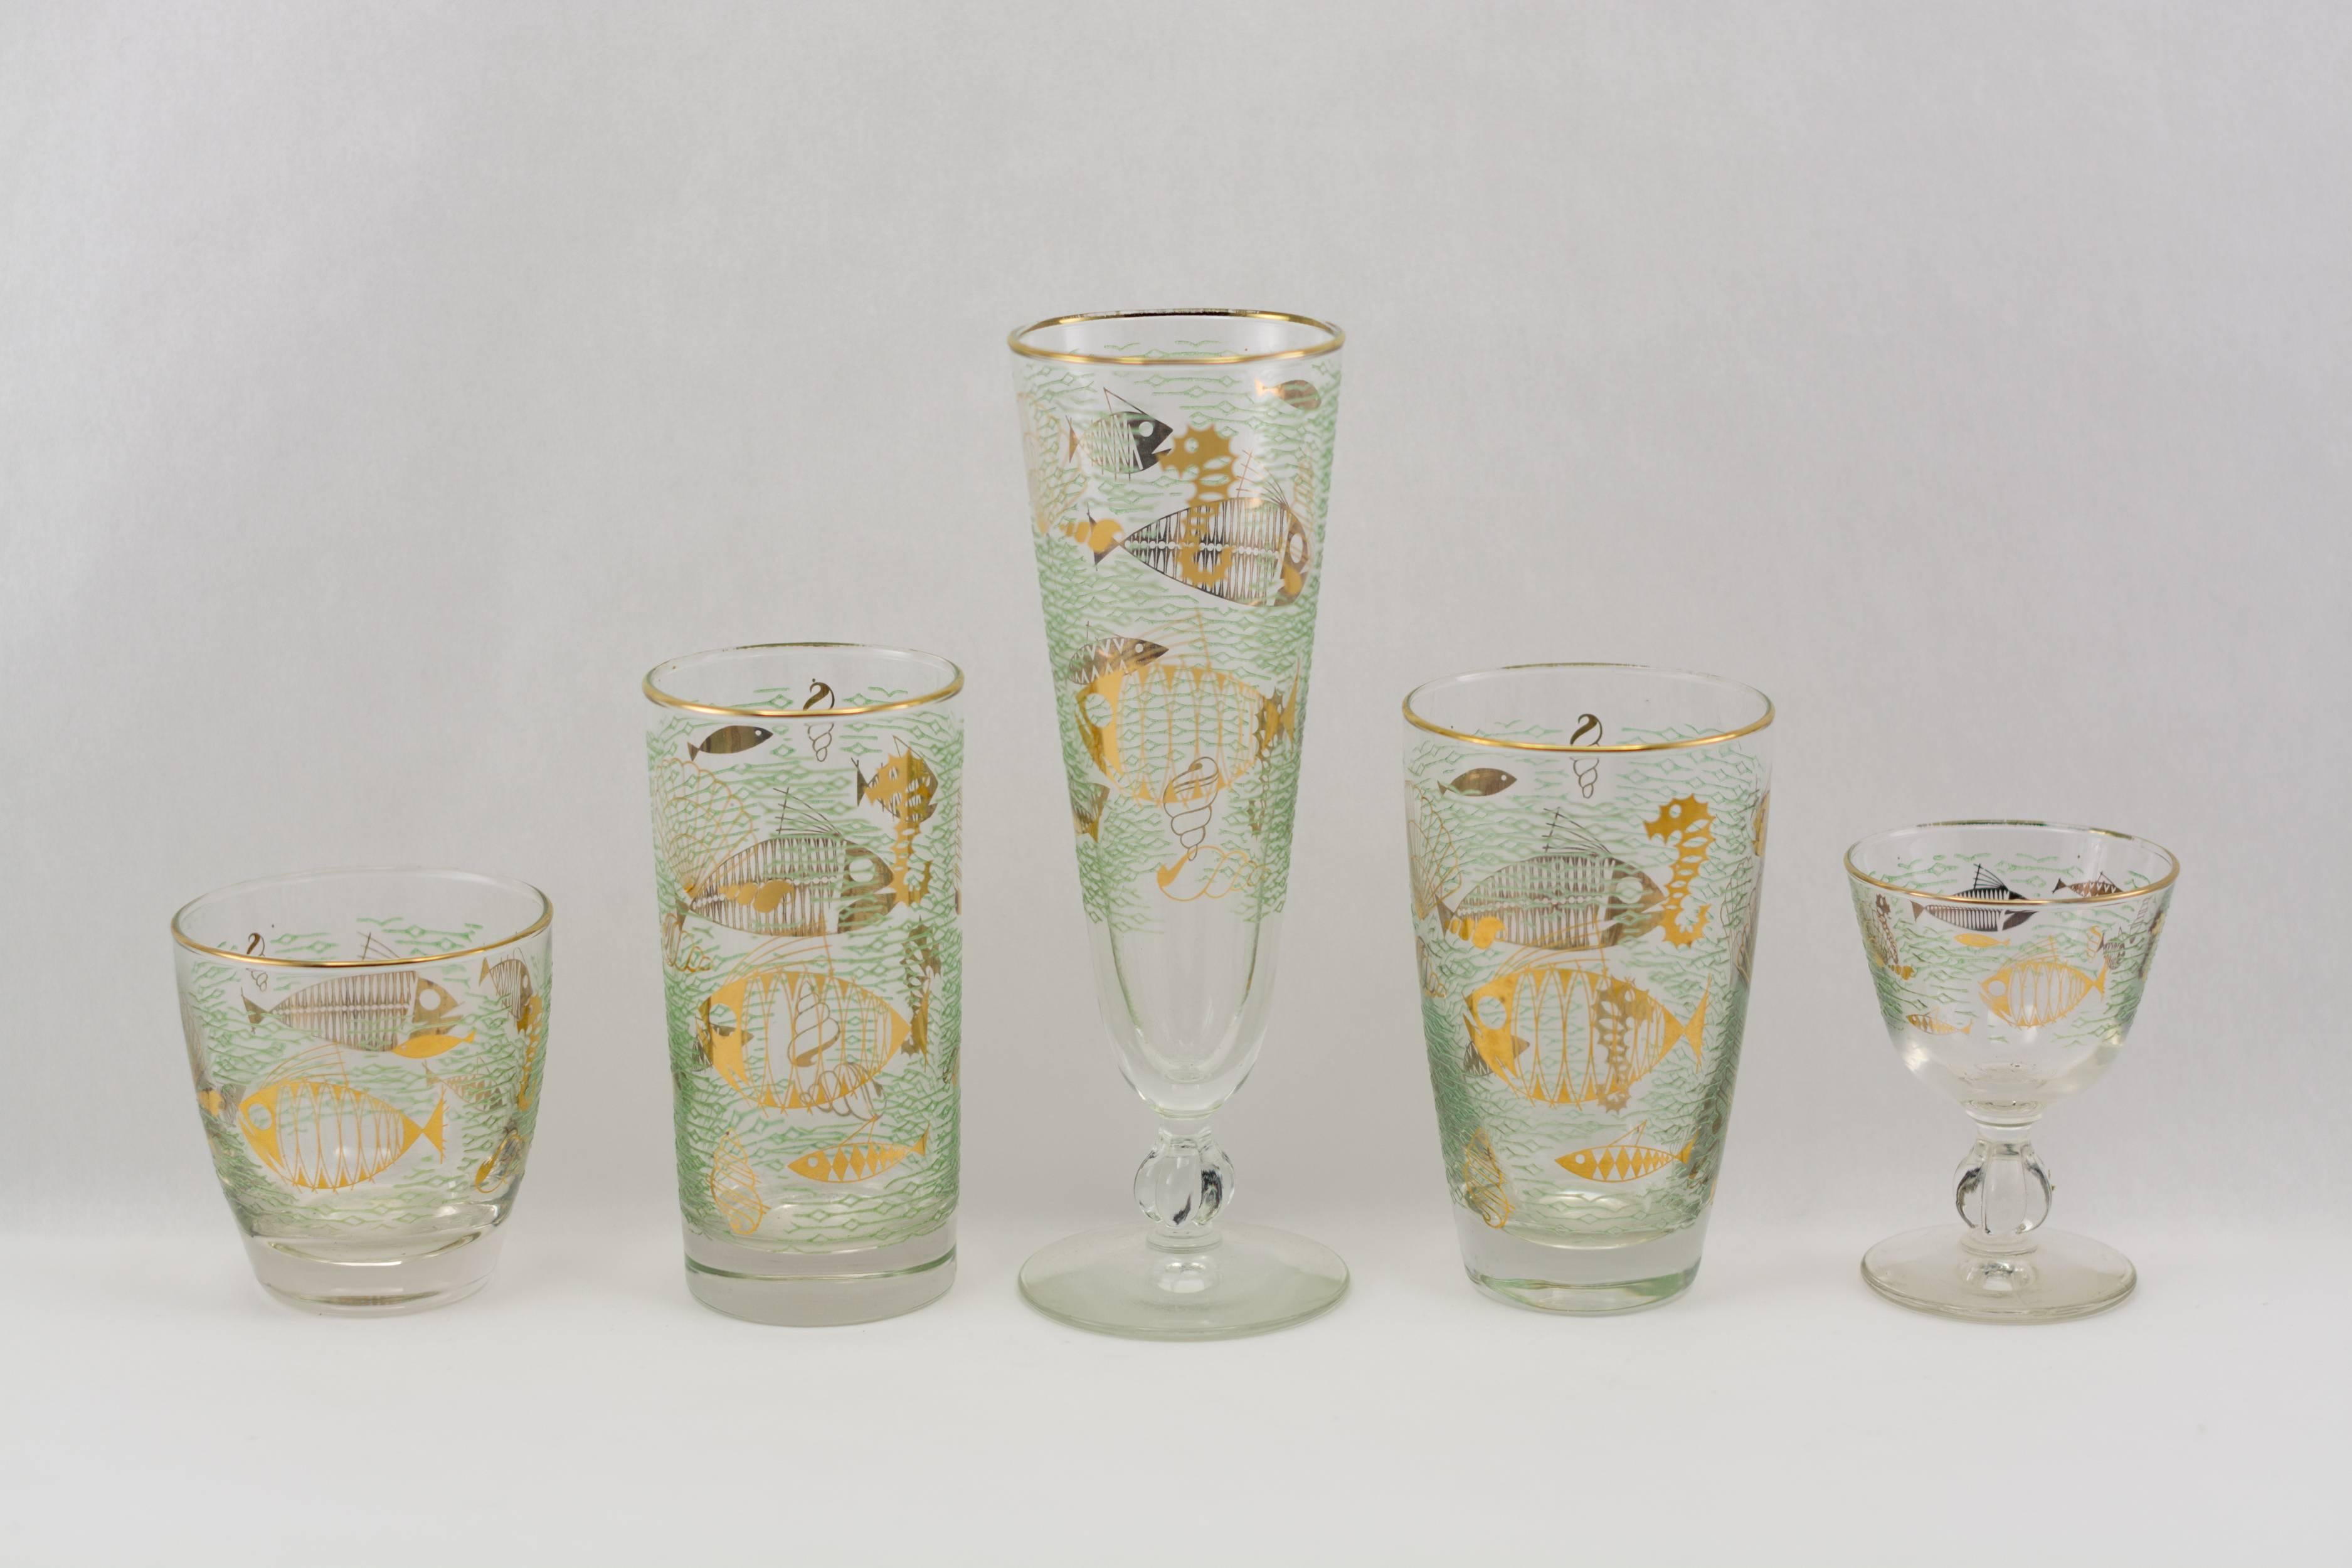 Libbey “Marine Life” Barware
60-piece suite of vintage barware by Libbey Glassware
with stylized fish, seahorses and shells in 22 karat gold against
a ground of raised translucent green enamel “waves”.
The suite consists of 12 each of five